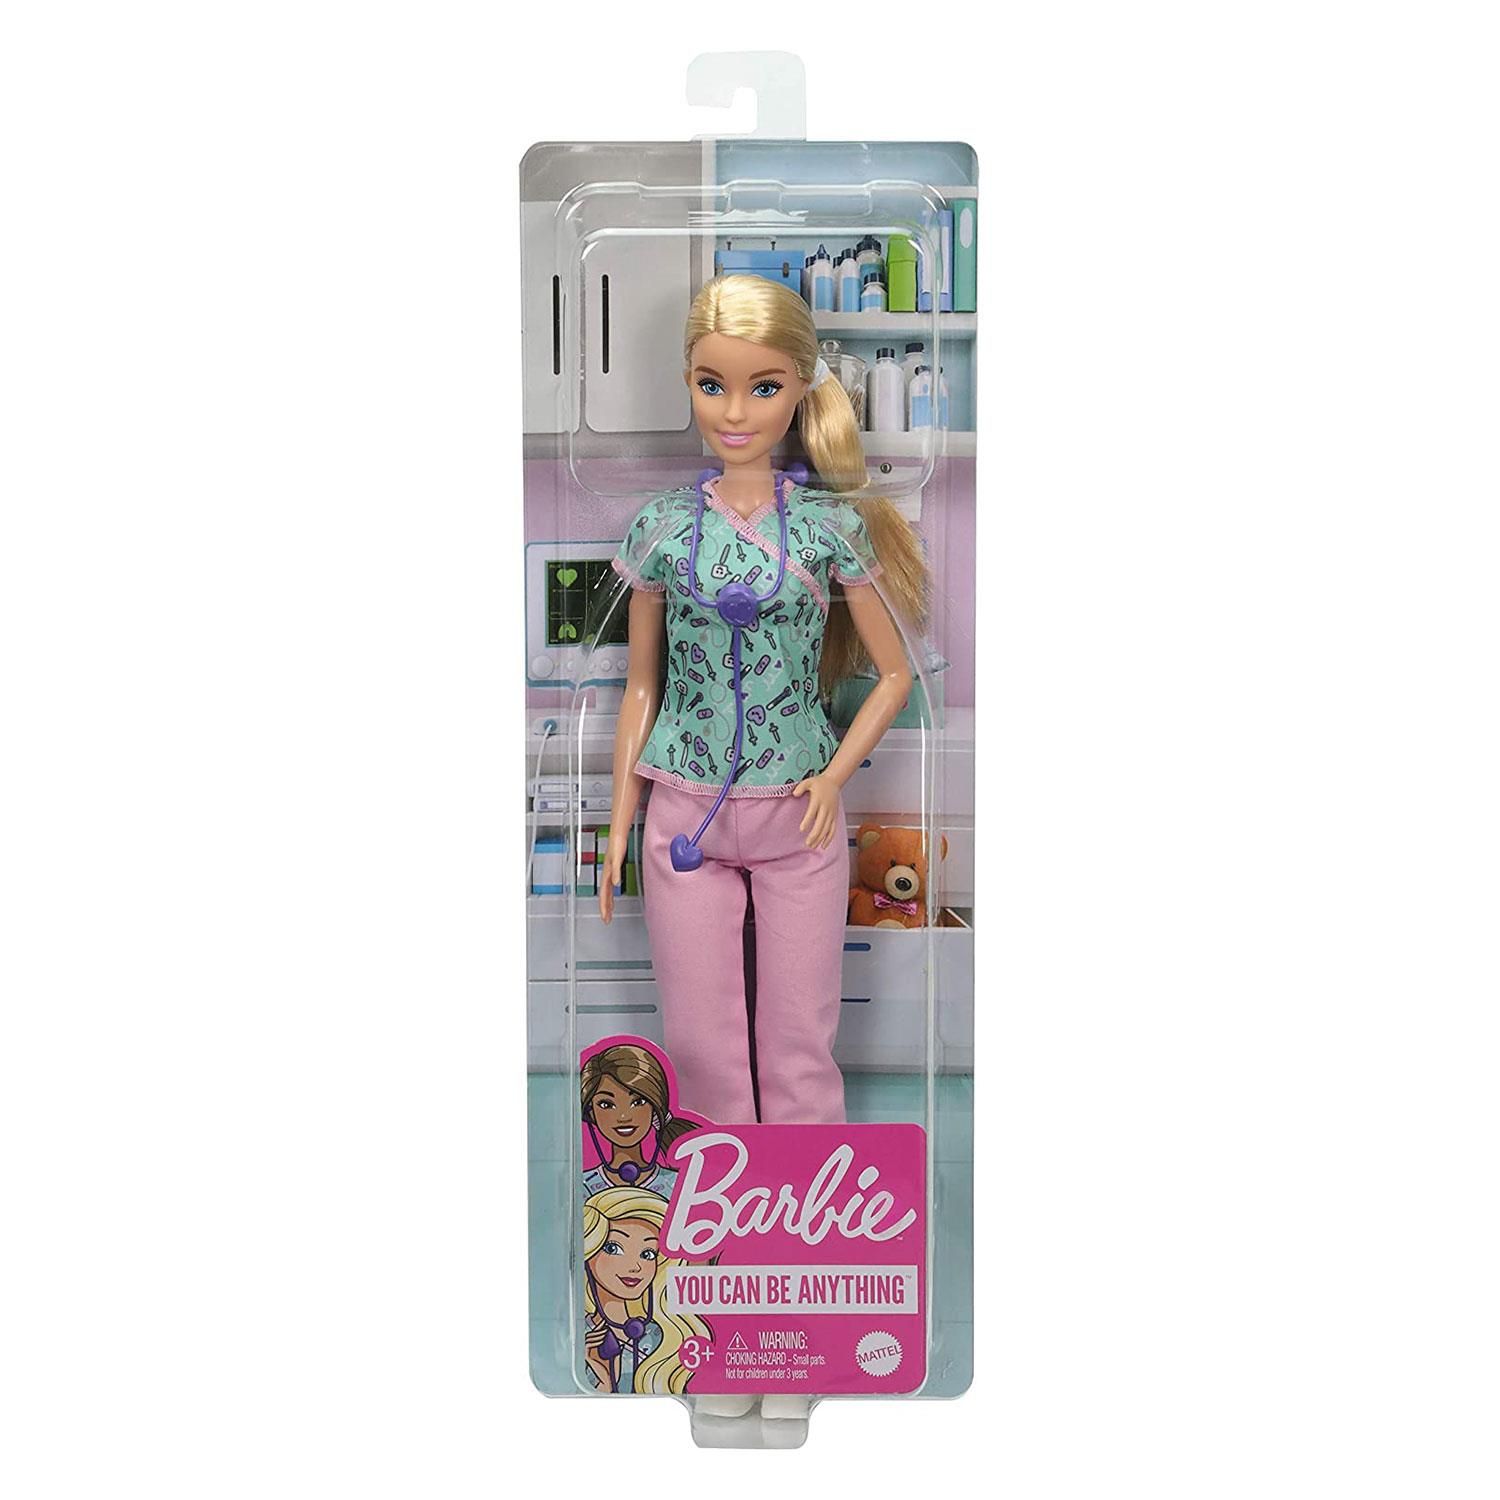 Barbie Careers Nurse Doll with Accessories, Great Toy Gift For 3 Years Old & Up

Explore a world of caretaking career fun with the Barbie nurse doll! When a girl plays with Barbie, she imagines everything she can become, and if you love taking care of and helping others, you can be a nurse! The Barbie nurse doll (12-in/30.40-cm) wears cute scrubs featuring a medical-tool print top and pink pants, white shoes and a sleek ponytail. She also comes with a stethoscope that hangs around her neck. Kids will love the endless possibilities for creative expression and storytelling fun. Doll cannot stand alone. Colours and decorations may vary. Makes a great gift for ages 3 years old and up.

Features:

​Explore caretaking career fun with the Barbie nurse doll and related accessories!
​Wearing cute scrubs featuring a medical-tool print top, pink pants and white shoes, a Barbie nurse doll (12-in/30.40-cm) is ready to make her rounds and check on patients!
​Place the stethoscope around the Barbie nurse doll's neck for realistic play.
​Explore a world of creative storytelling fun with the Barbie nurse doll!
​Makes a great gift for kids 3 years old and up, especially those interested in caretaking and helping others!

Specifications:

Toy Type: Barbie Careers Nurse Doll
Colour: Green
Material: Abs Plastic
Age Range:  3 Years & Above

Box Contains: Barbie Careers Nurse Doll with Accessories